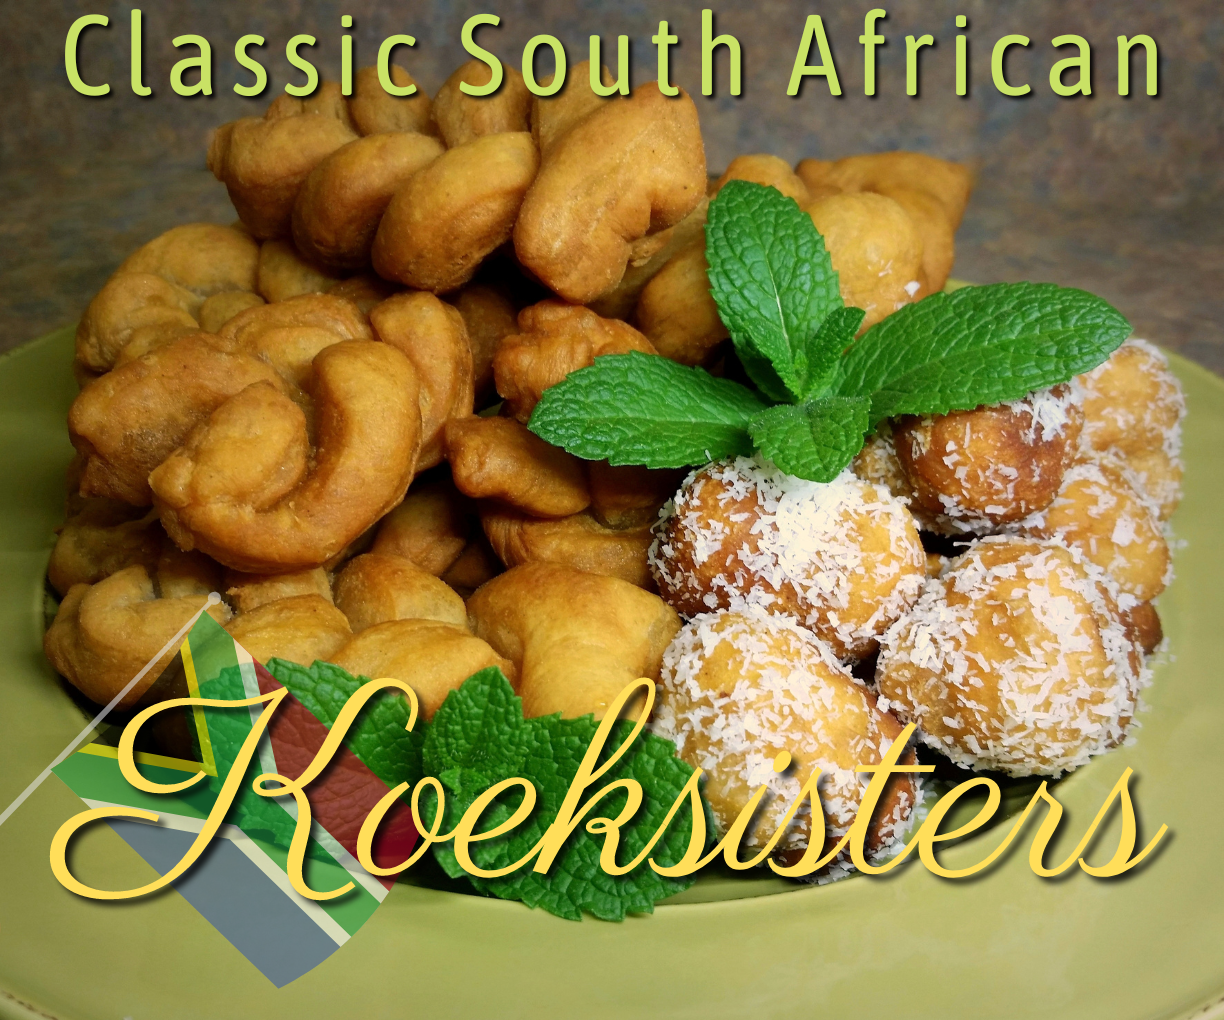 Koeksisters - a South African Classic